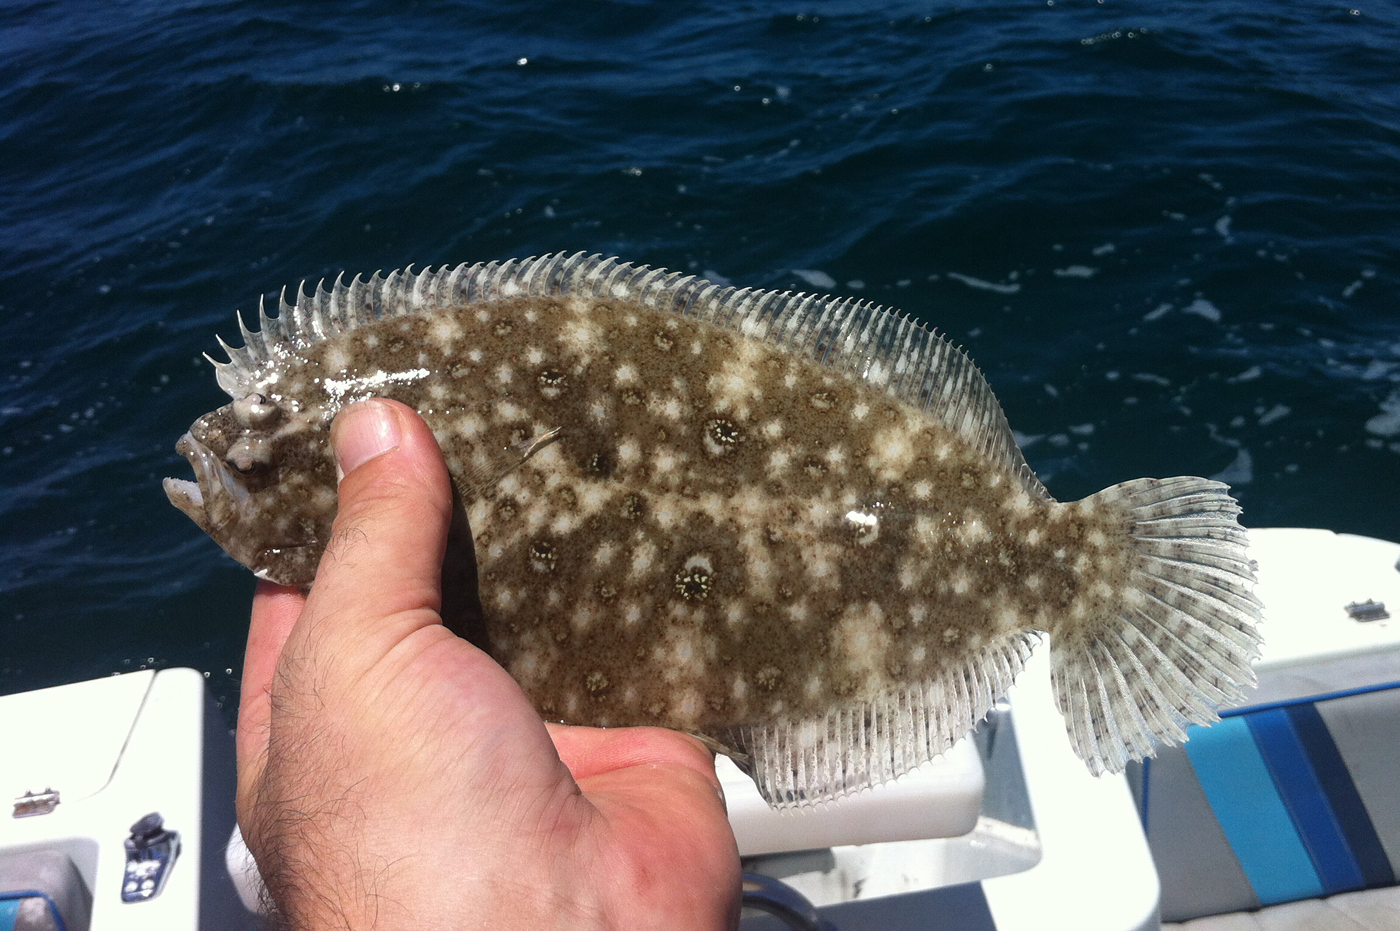 Small tooth flounder